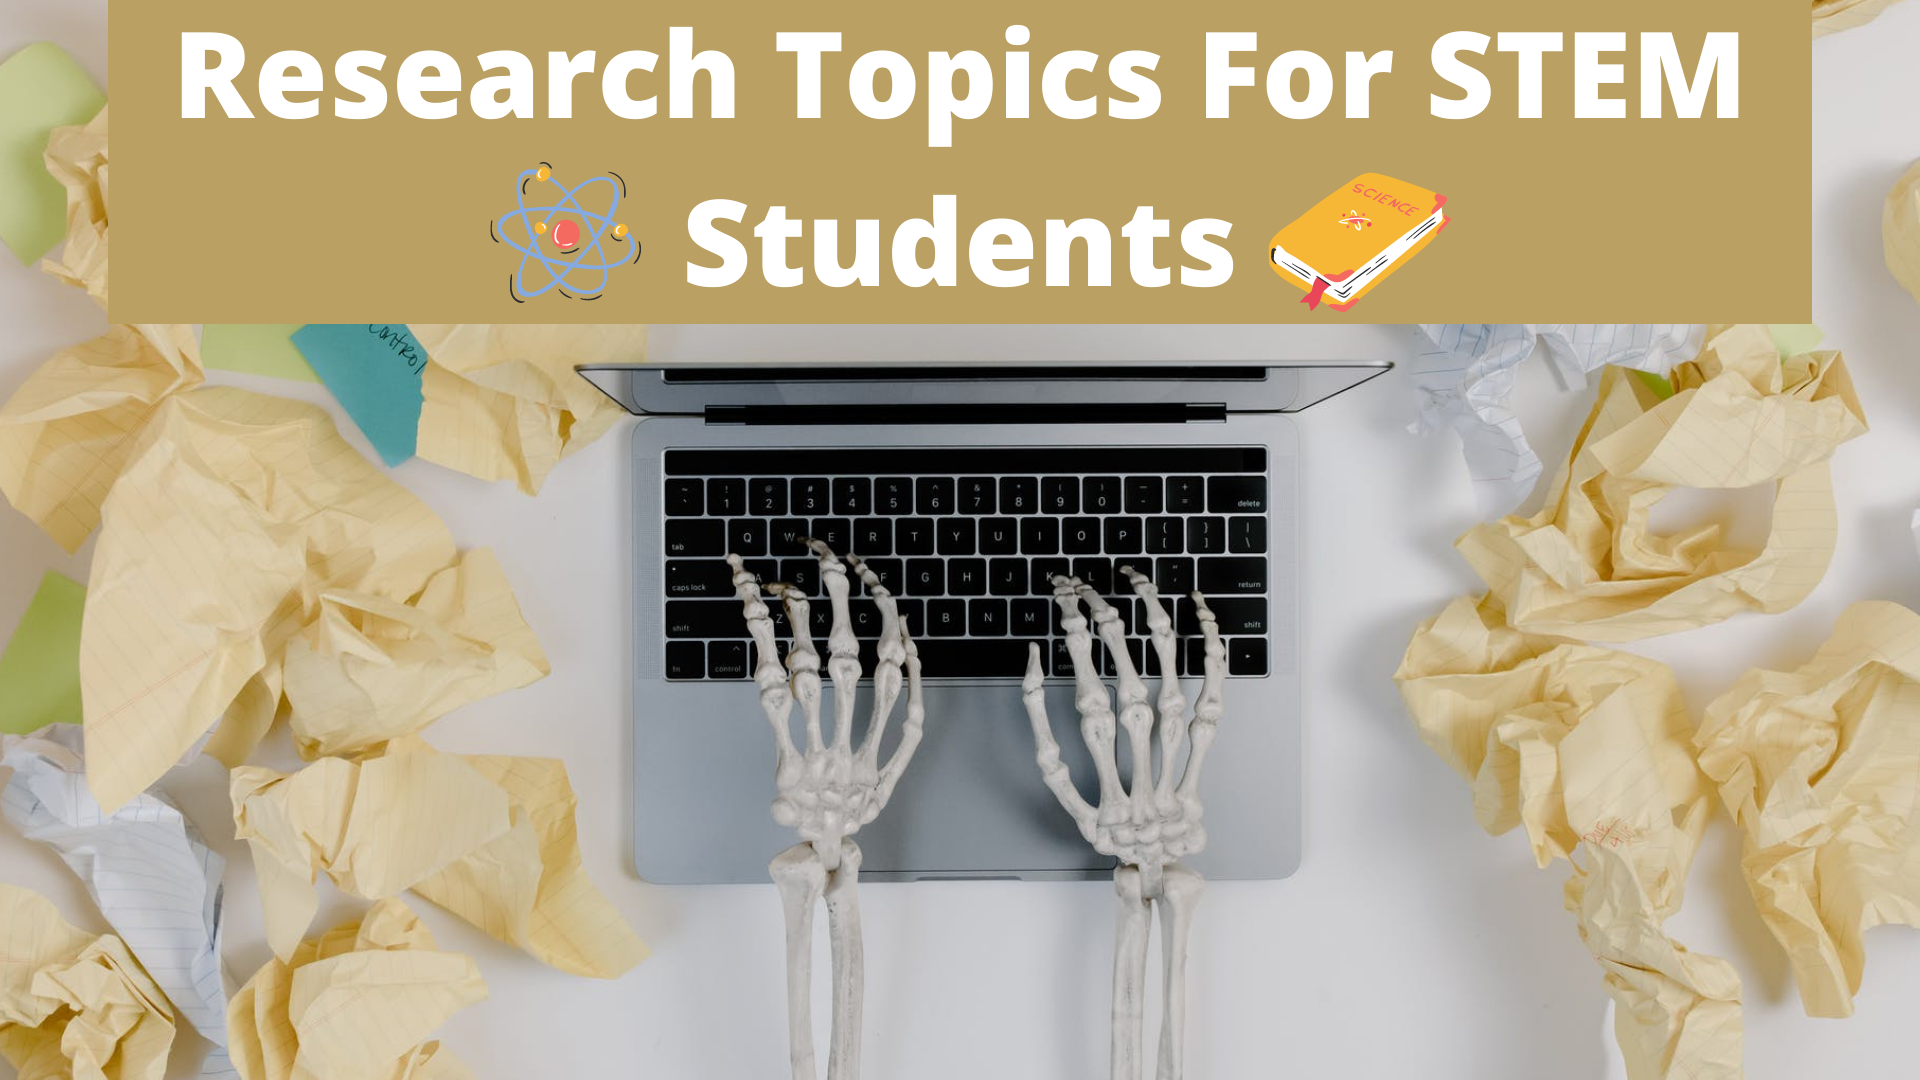 Research Topics For STEM Students